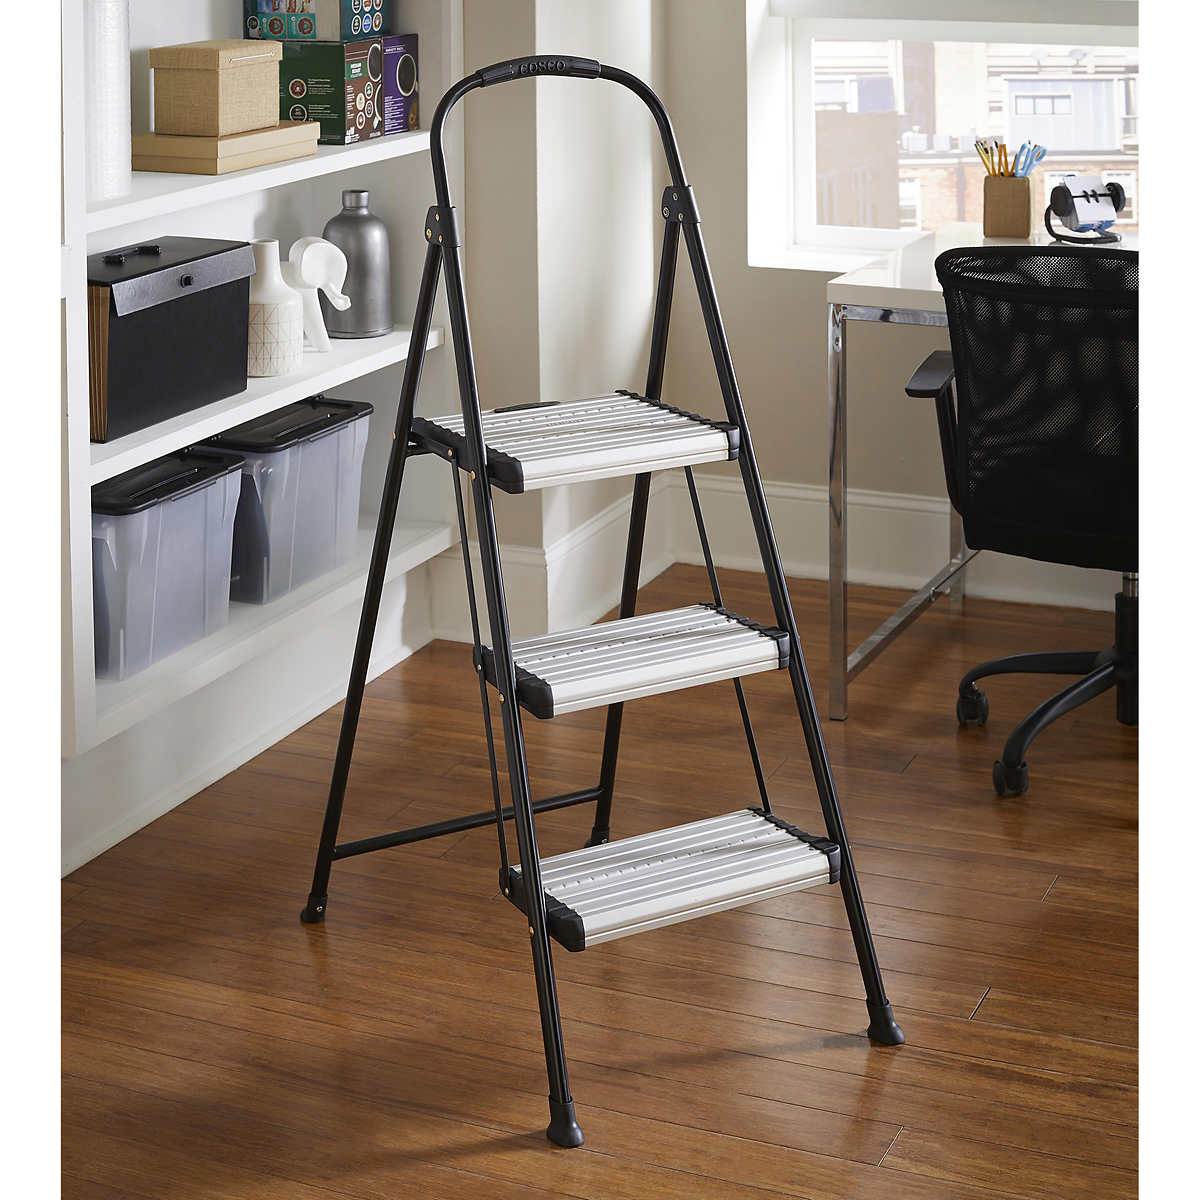 Cosco 3 Wide Step Folding Step Stool Free shipping on orders over $25 shipped by amazon. cosco 3 wide step folding step stool